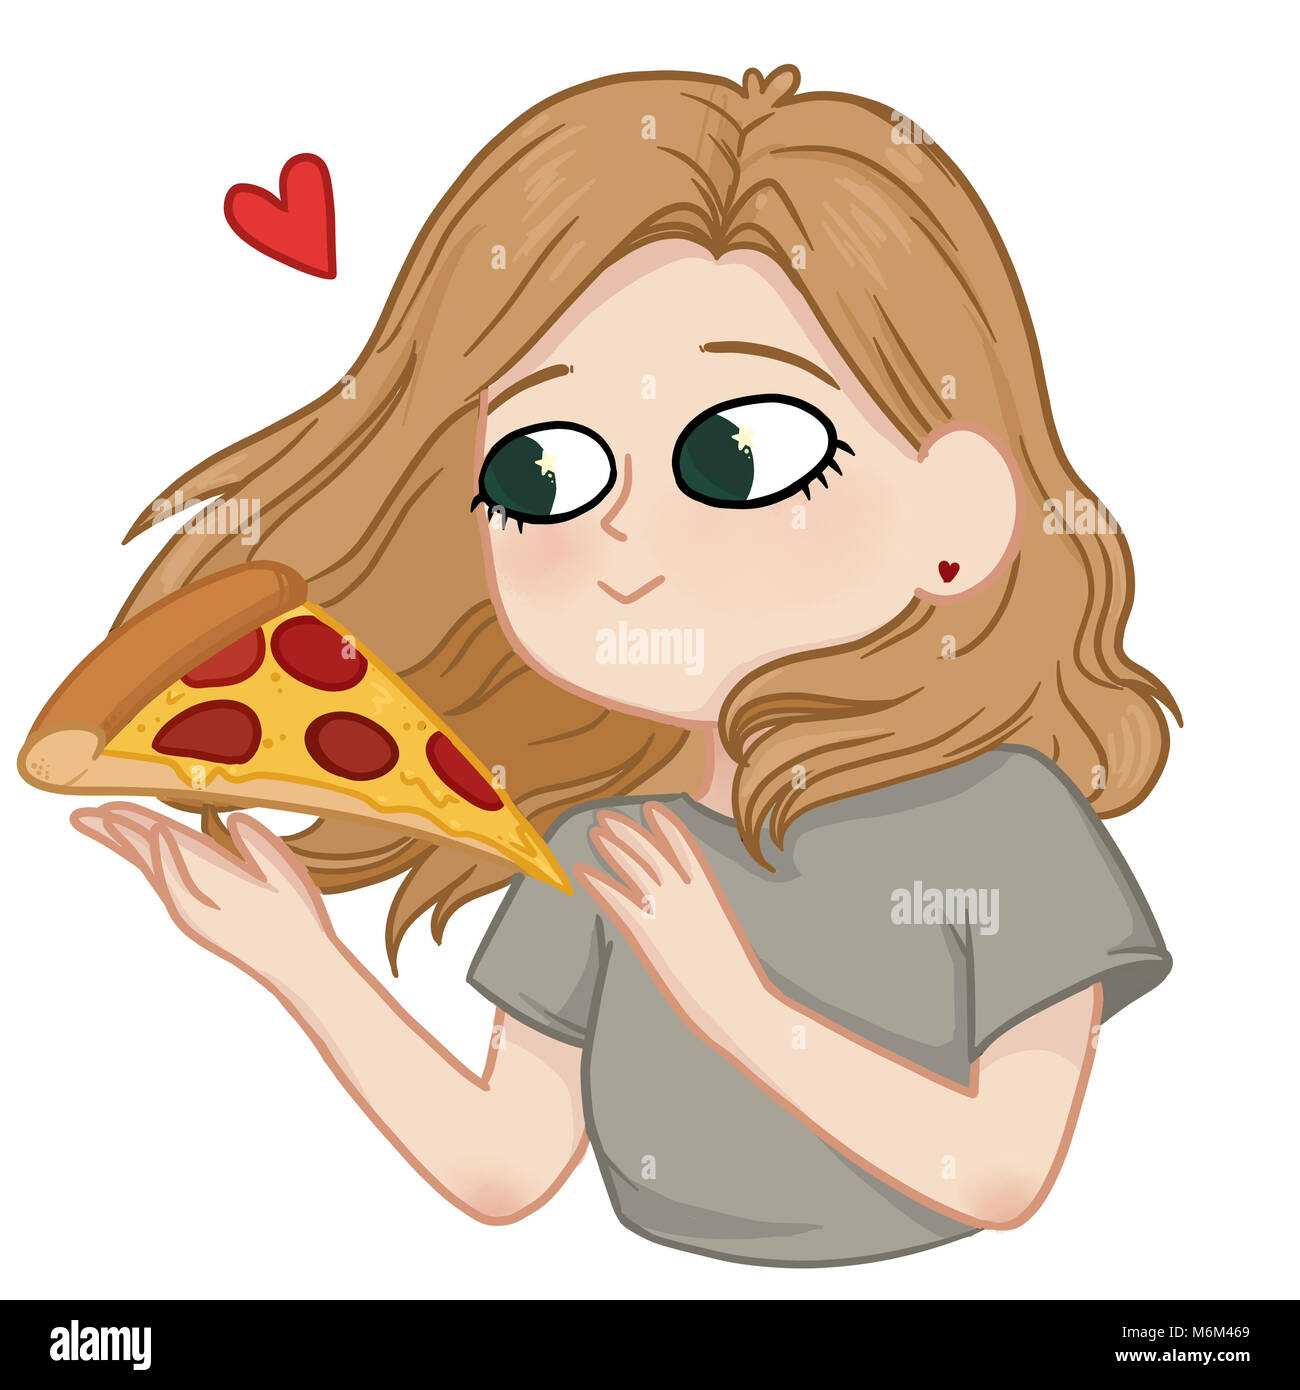 Beautiful girl with big green eyes is going to eat a slice of pizza, favourite food. Stock Photo